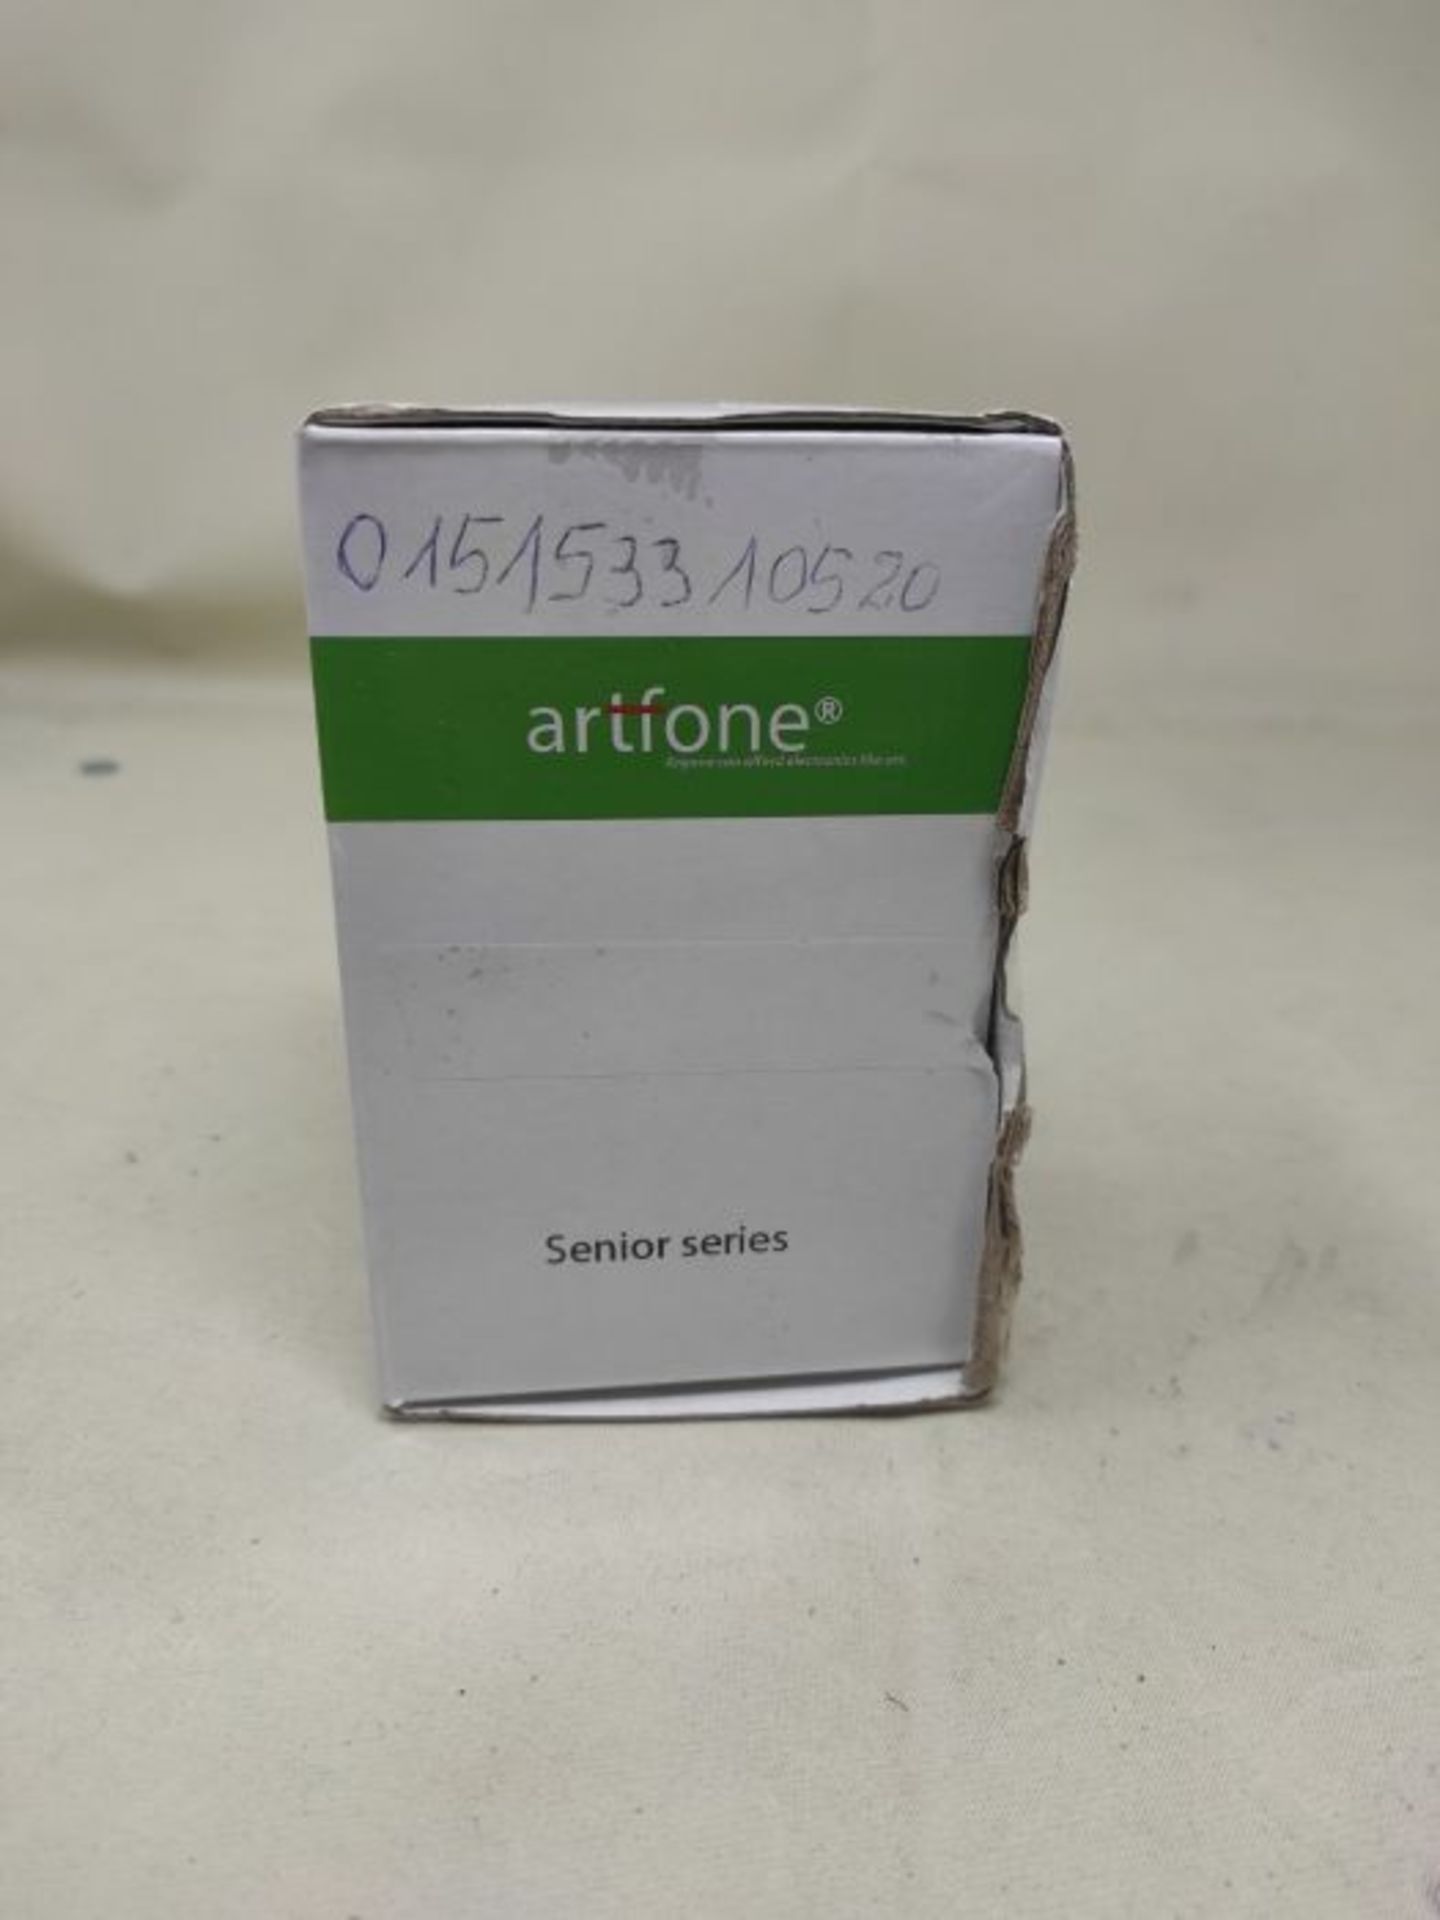 Mobile Phone for Elderly People, artfone 1400mAh Battery Big Button Mobile Phones Dual - Image 2 of 3